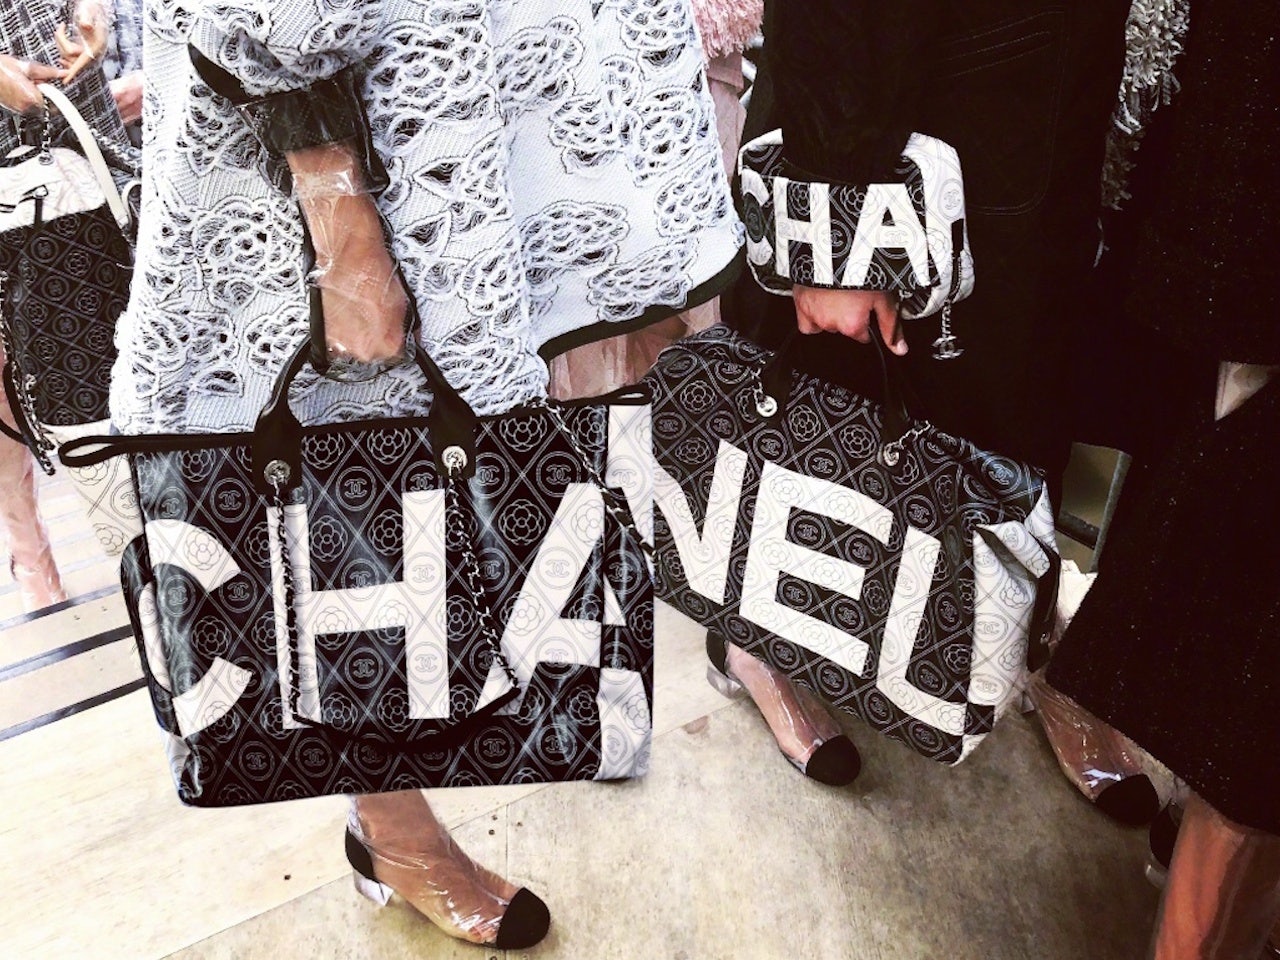 “If you give everything to everyone straight away, I think you lose that exclusivity.” - President of Chanel Fashion, Bruno Pavlovsky. Photo: Chanel/WeChat